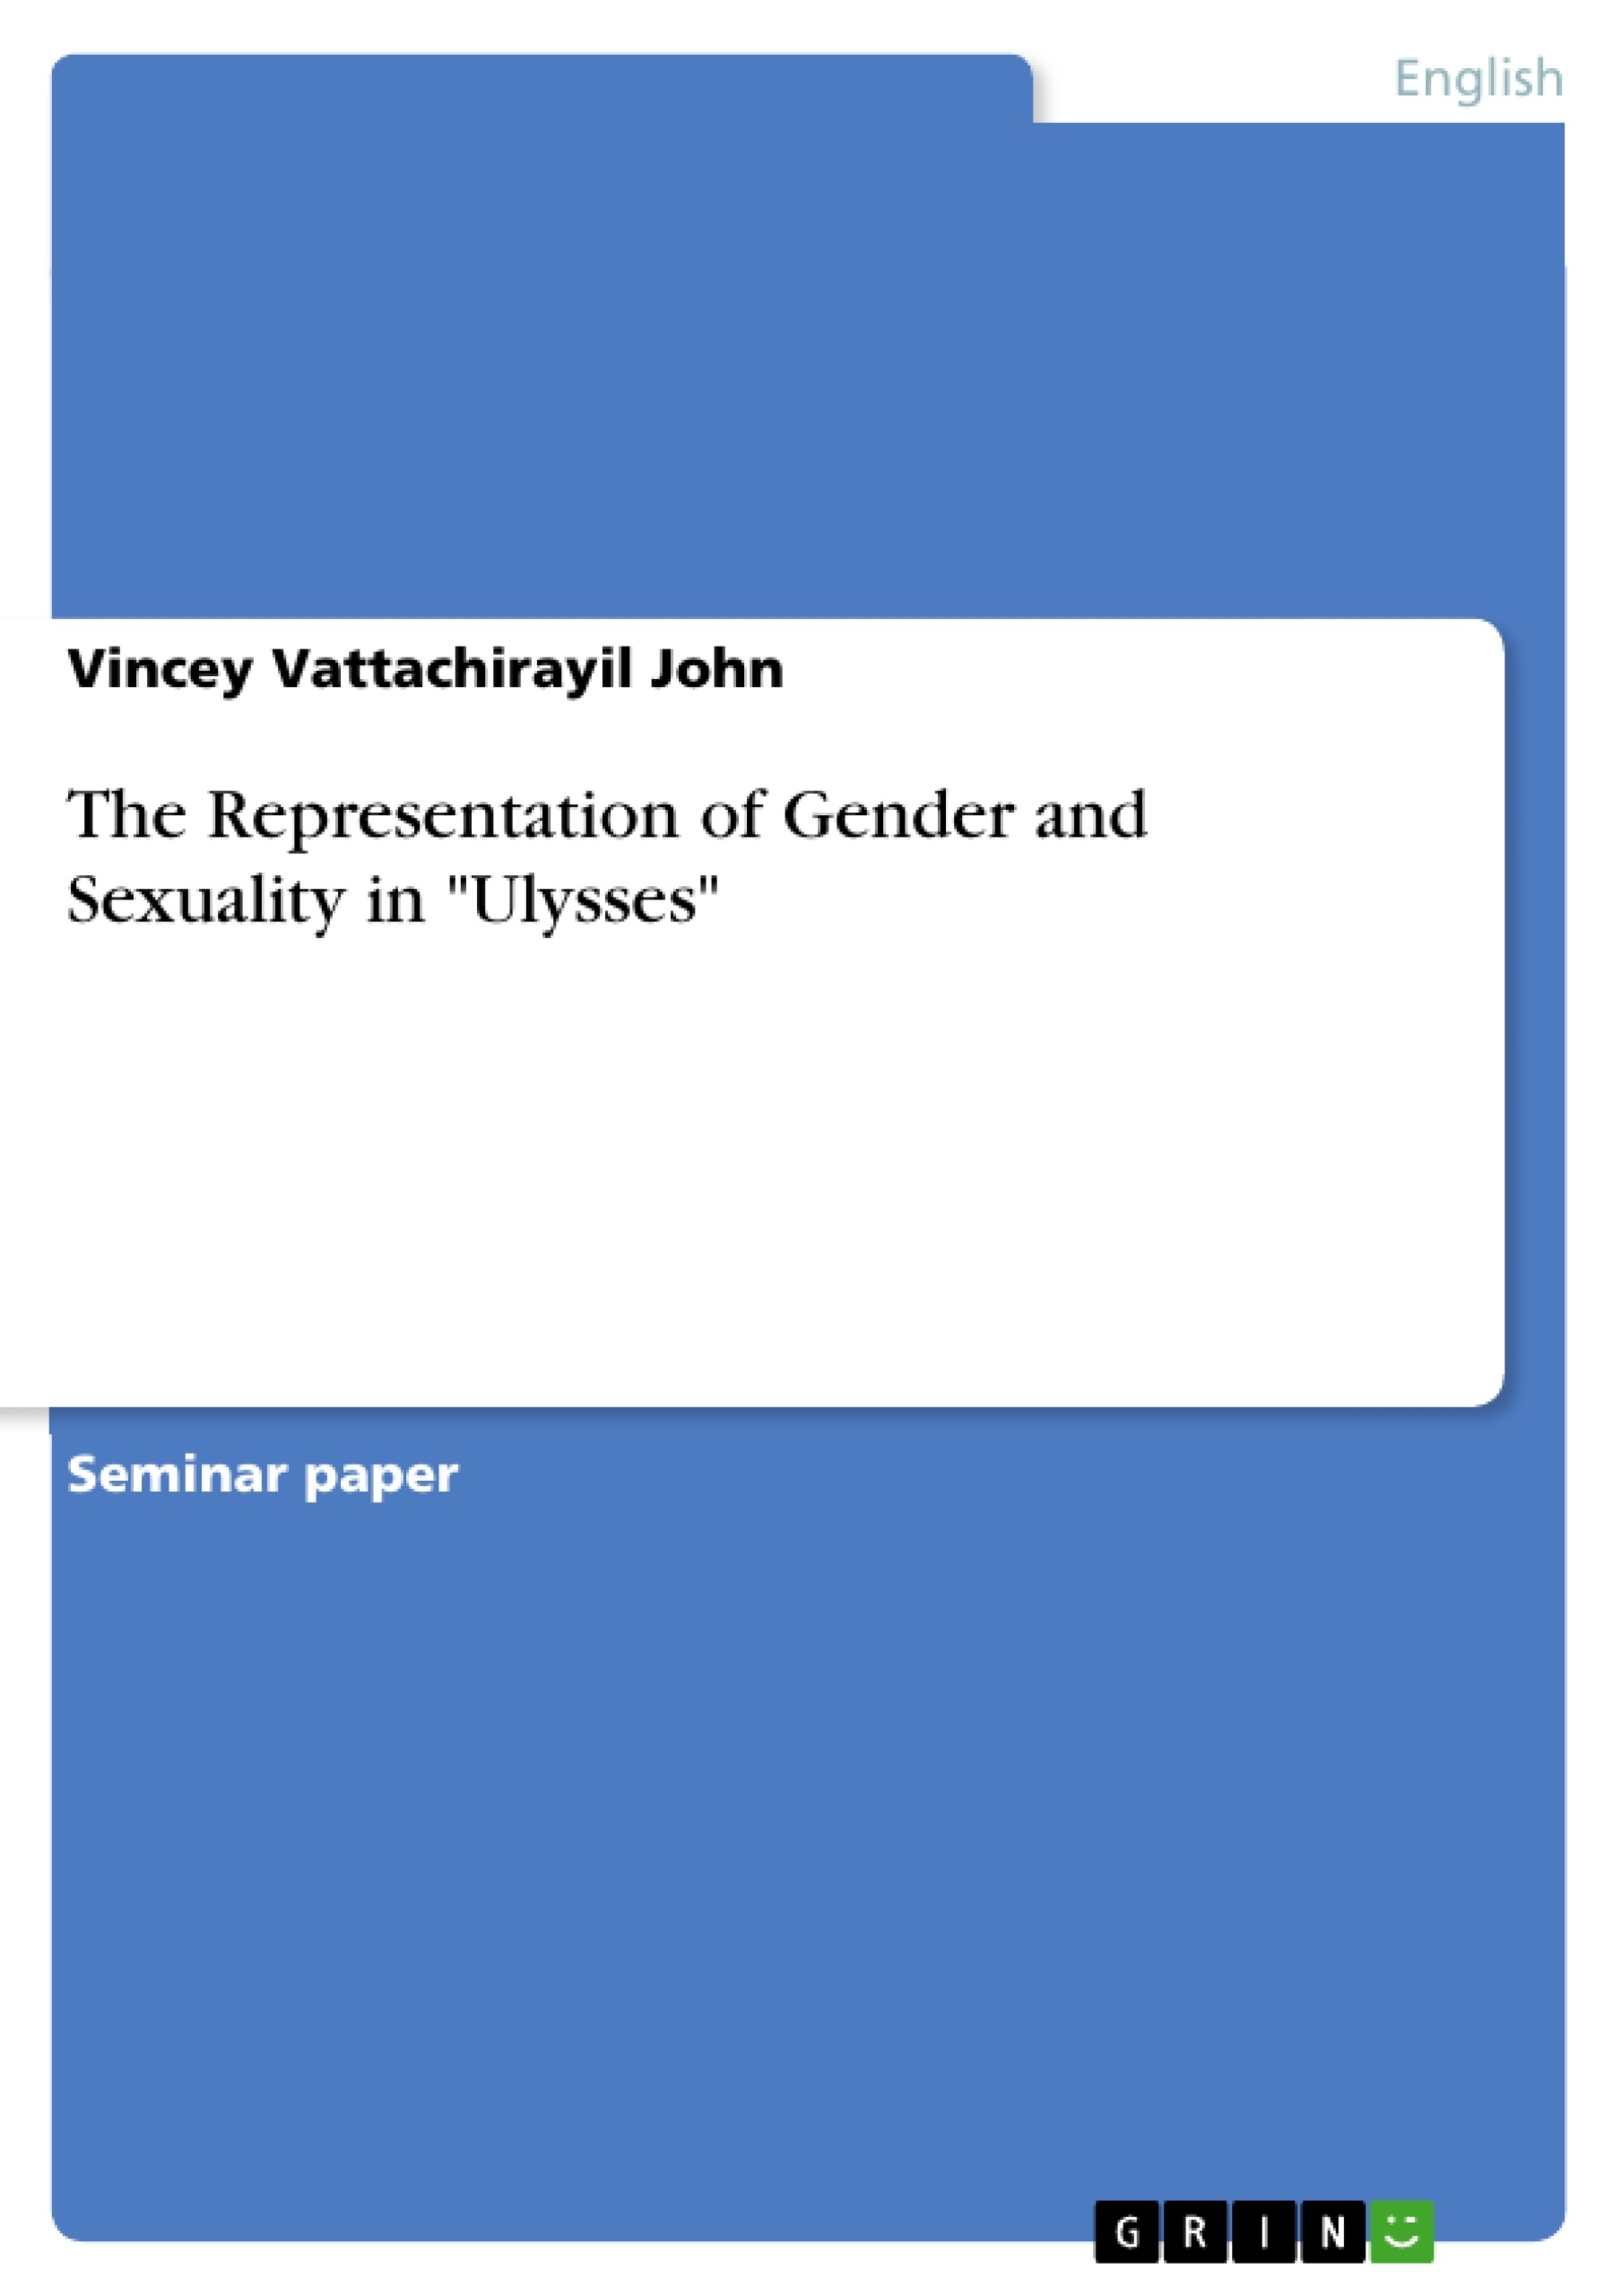 Titel: The Representation of Gender and Sexuality in "Ulysses"